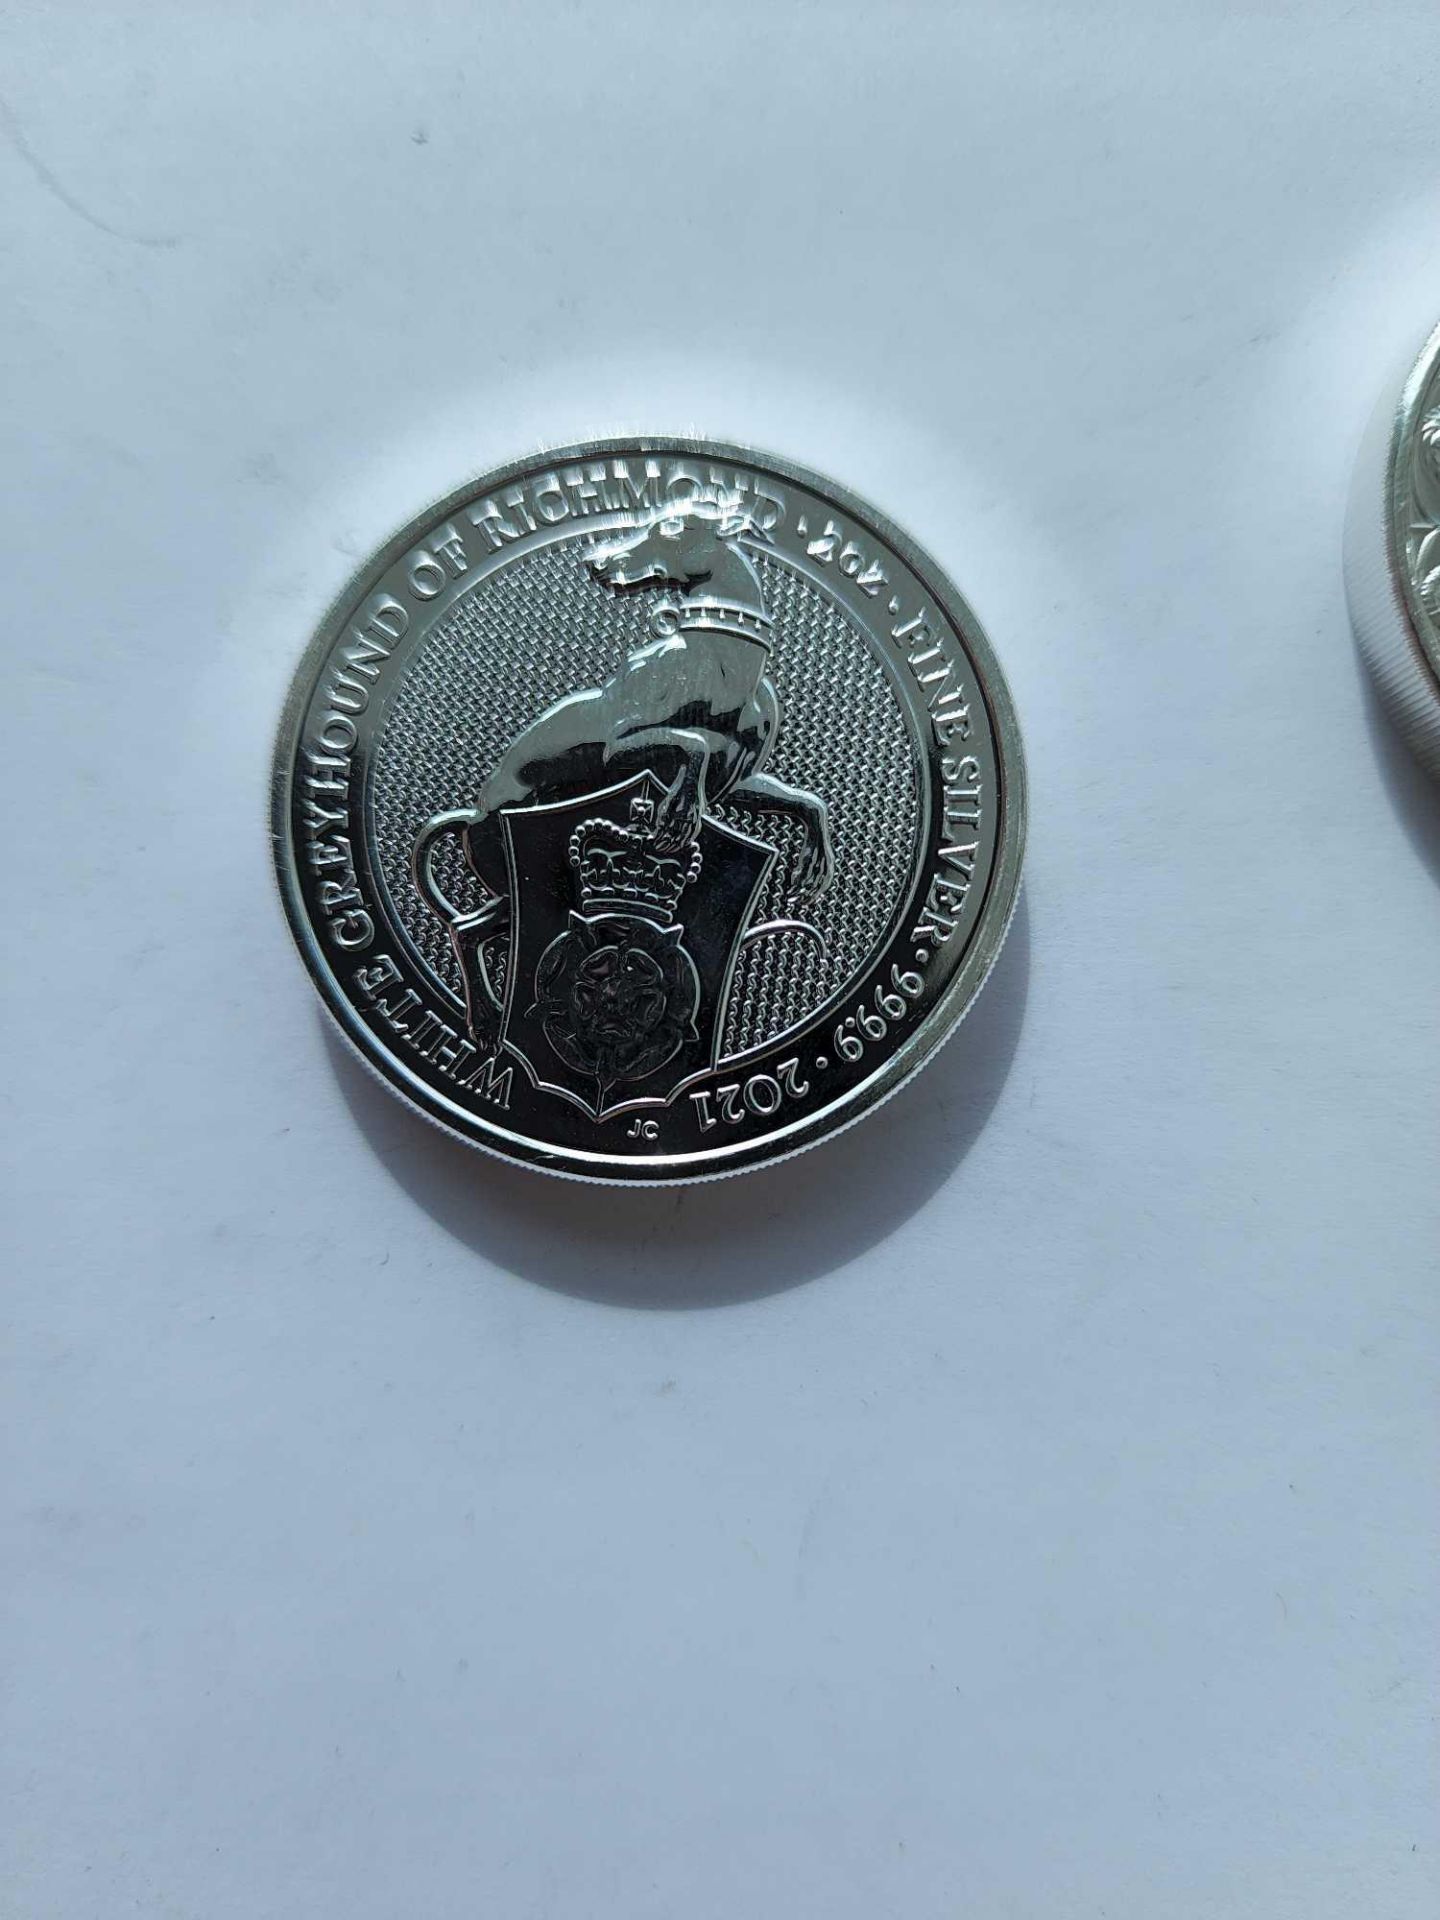 The Queens Beasts and Greyhound 2 coin set (4 oz total) - Image 2 of 4